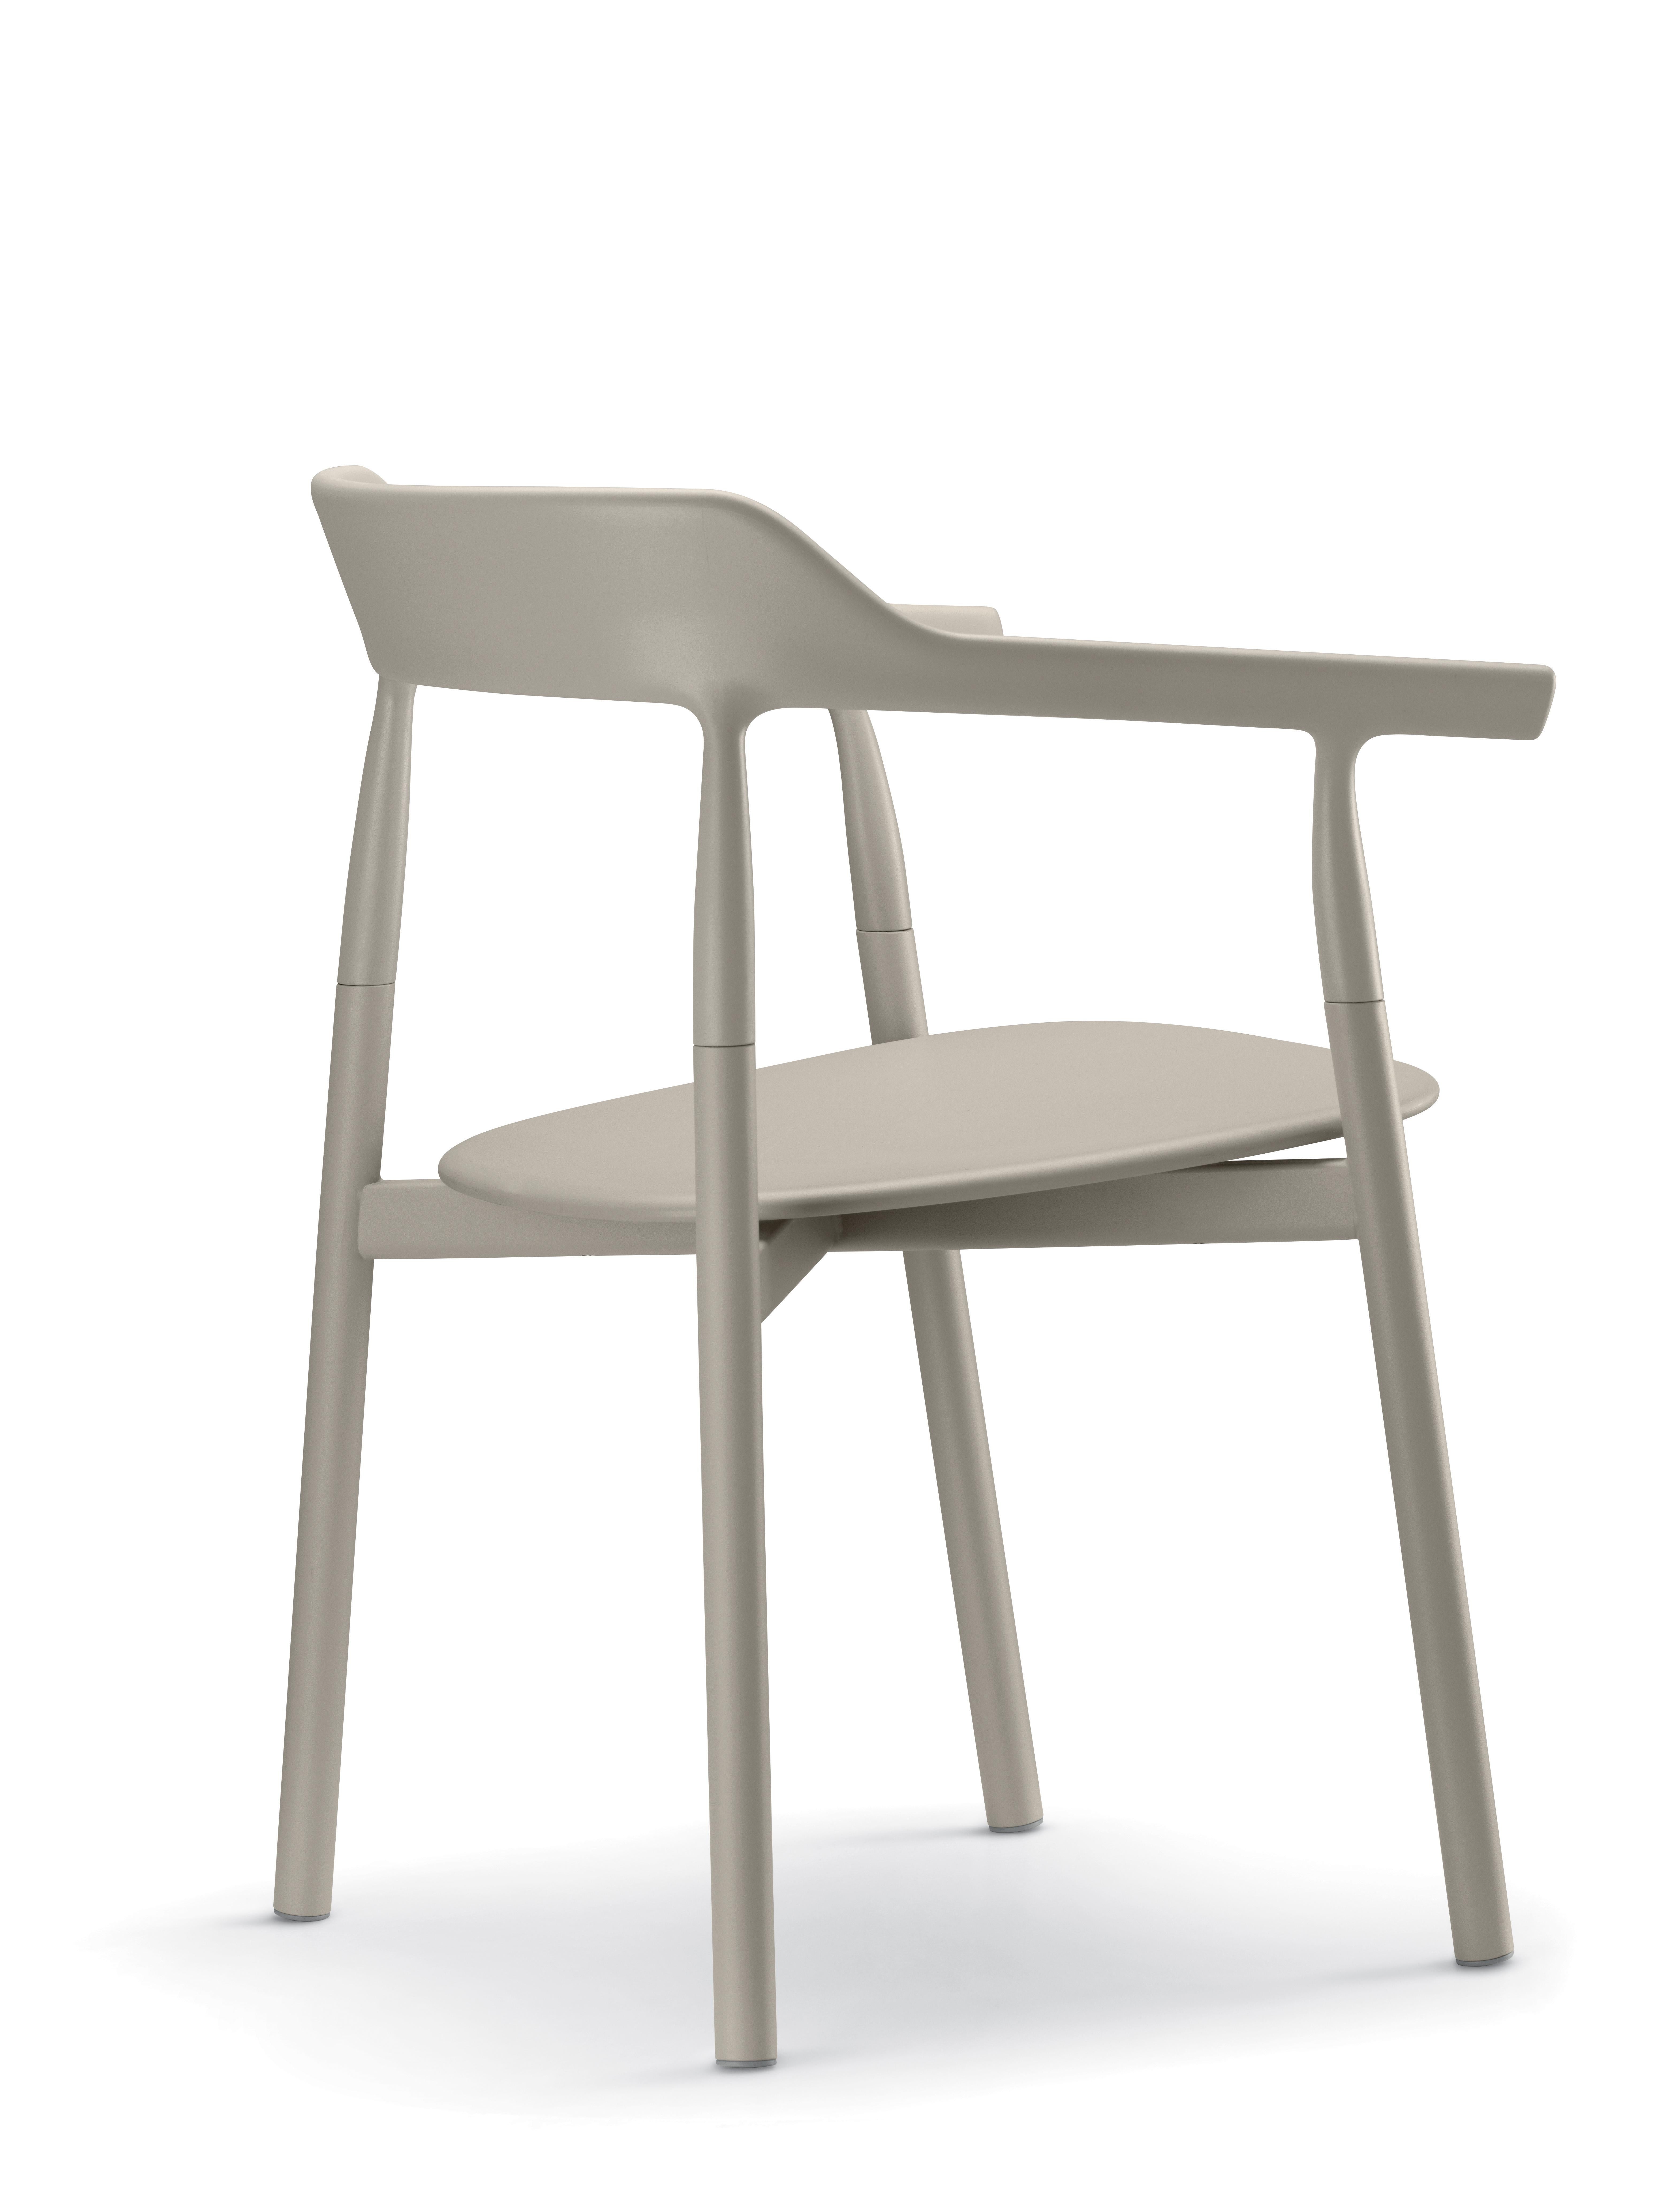 Alias 10E Twig Comfort Chair in Sand Colored Seat and Lacquered Steel Frame by Nendo

Chair with structure in lacquered steel; back in solid lacquered plastic material; seat in solid plastic material lacquered or upholstered with fabric or